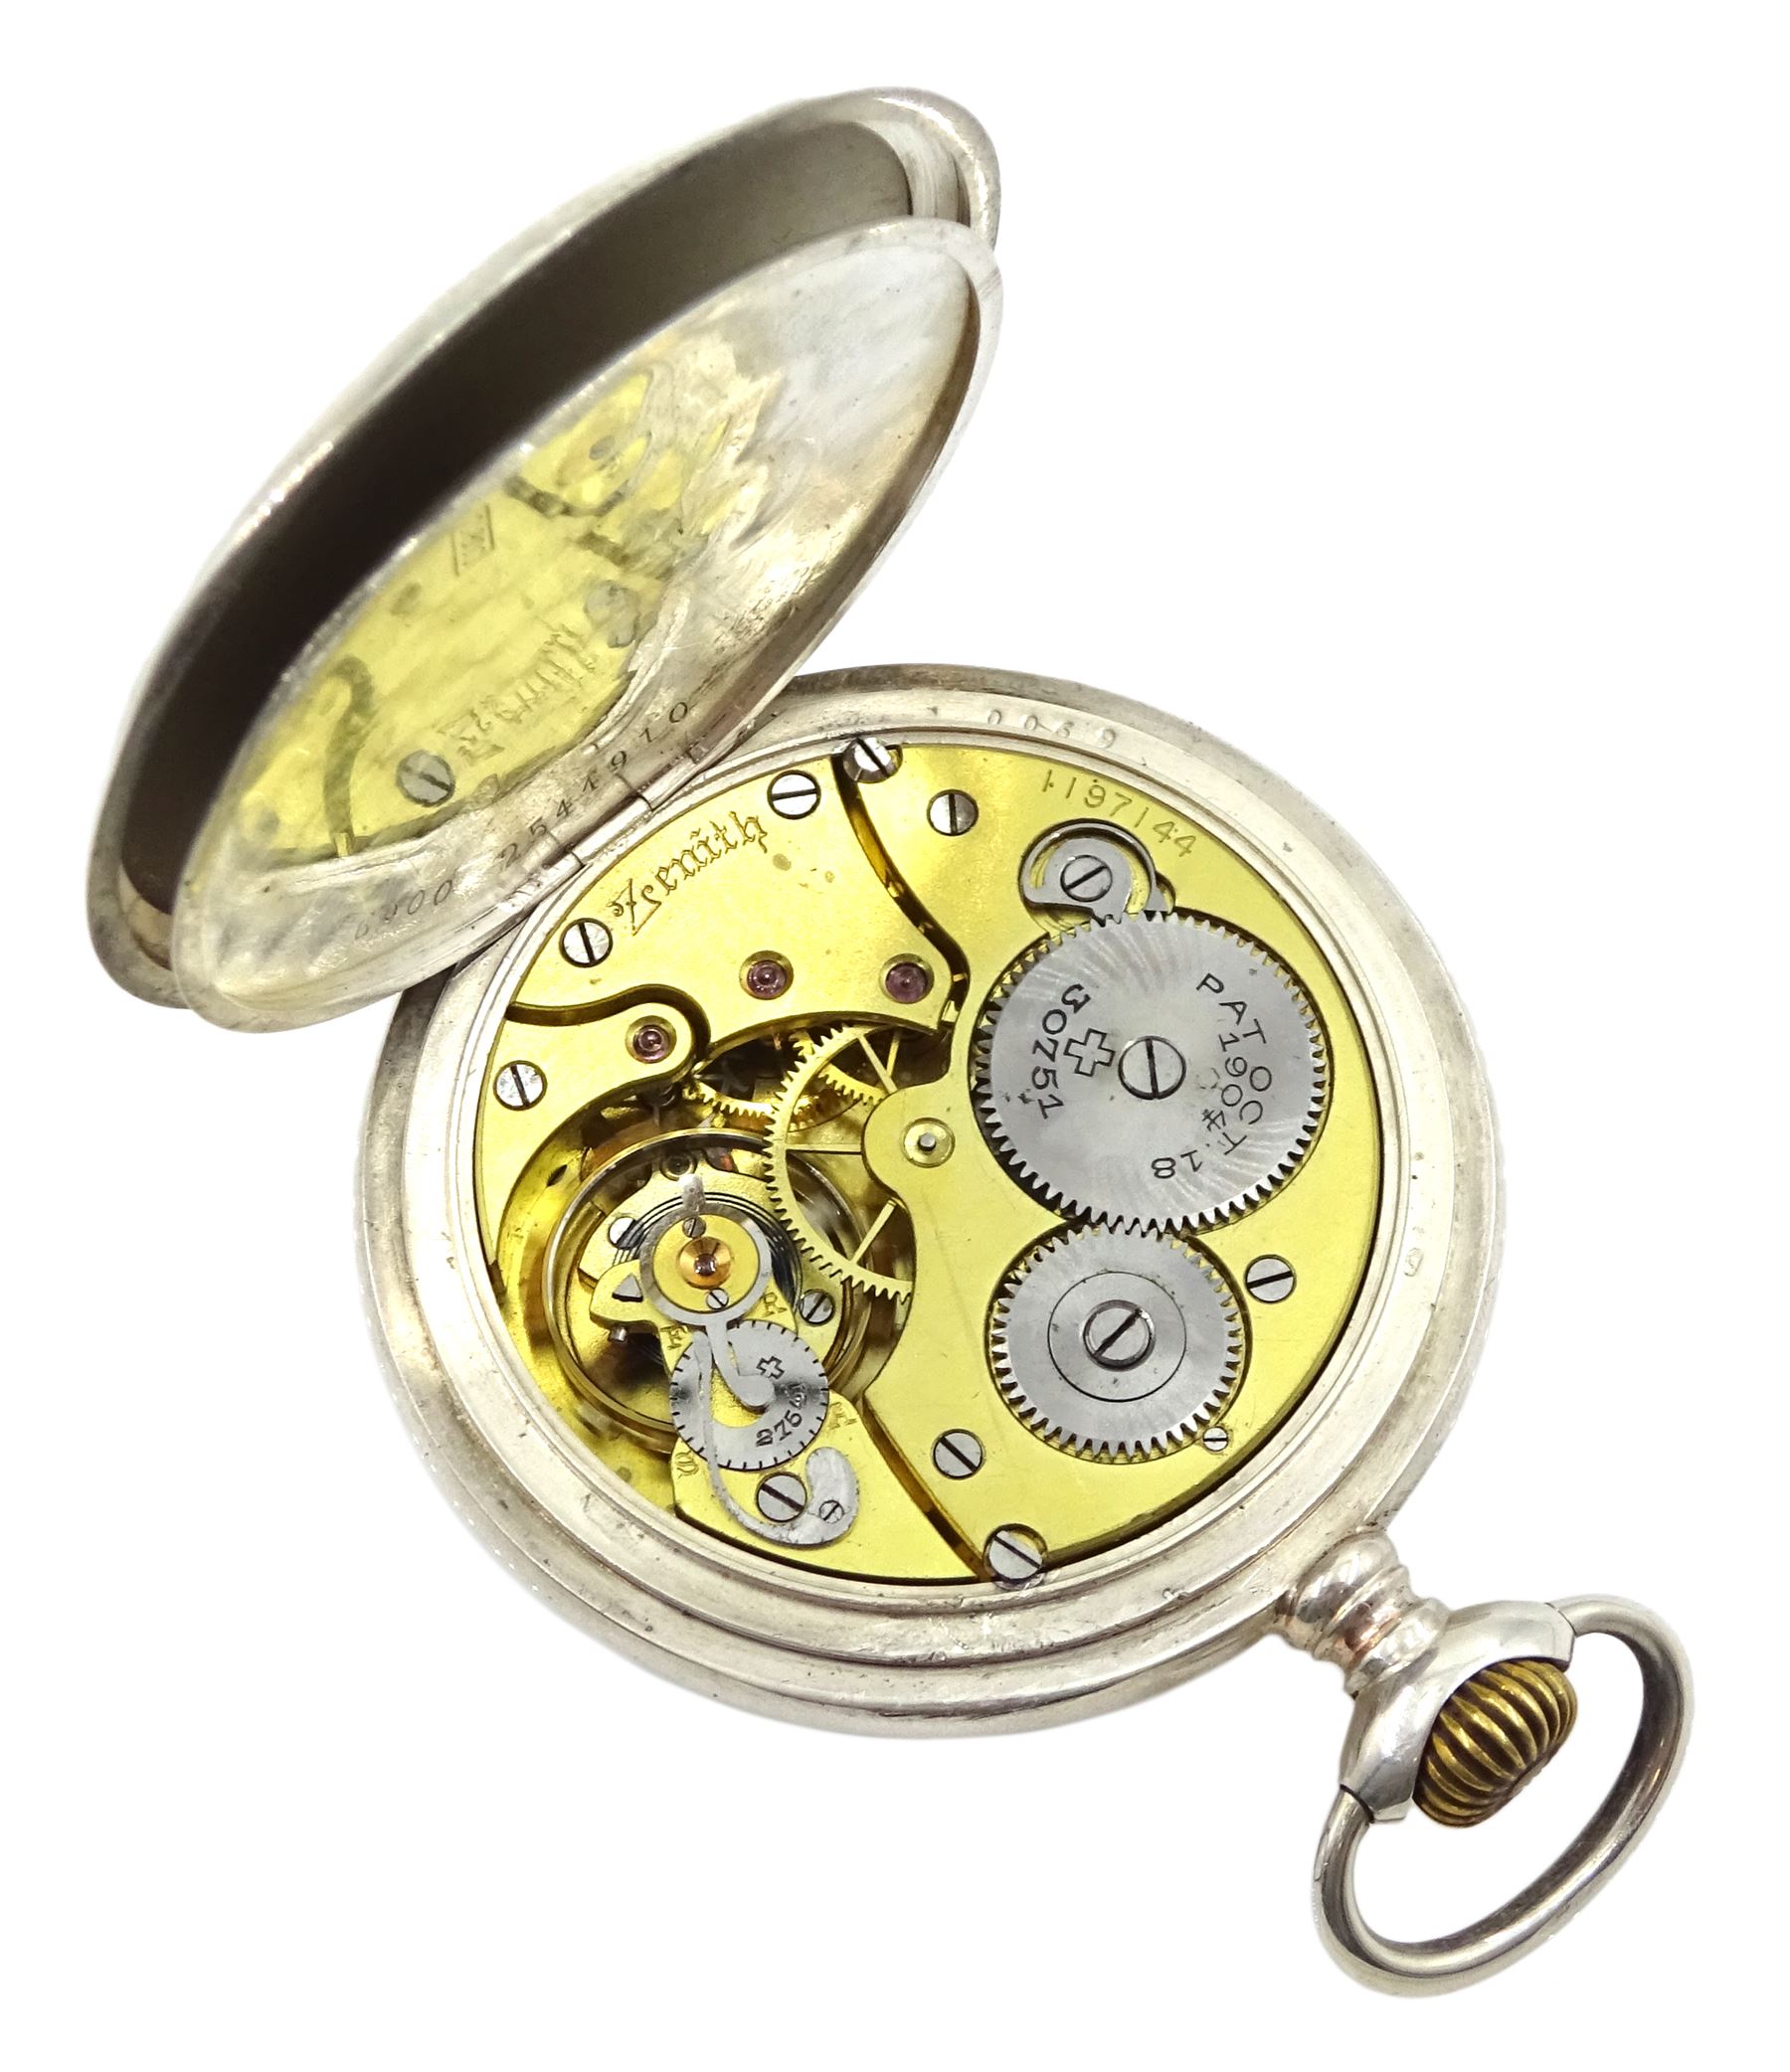 Silver open face keyless lever 15 rubies pocket watch by Zenith - Image 3 of 4